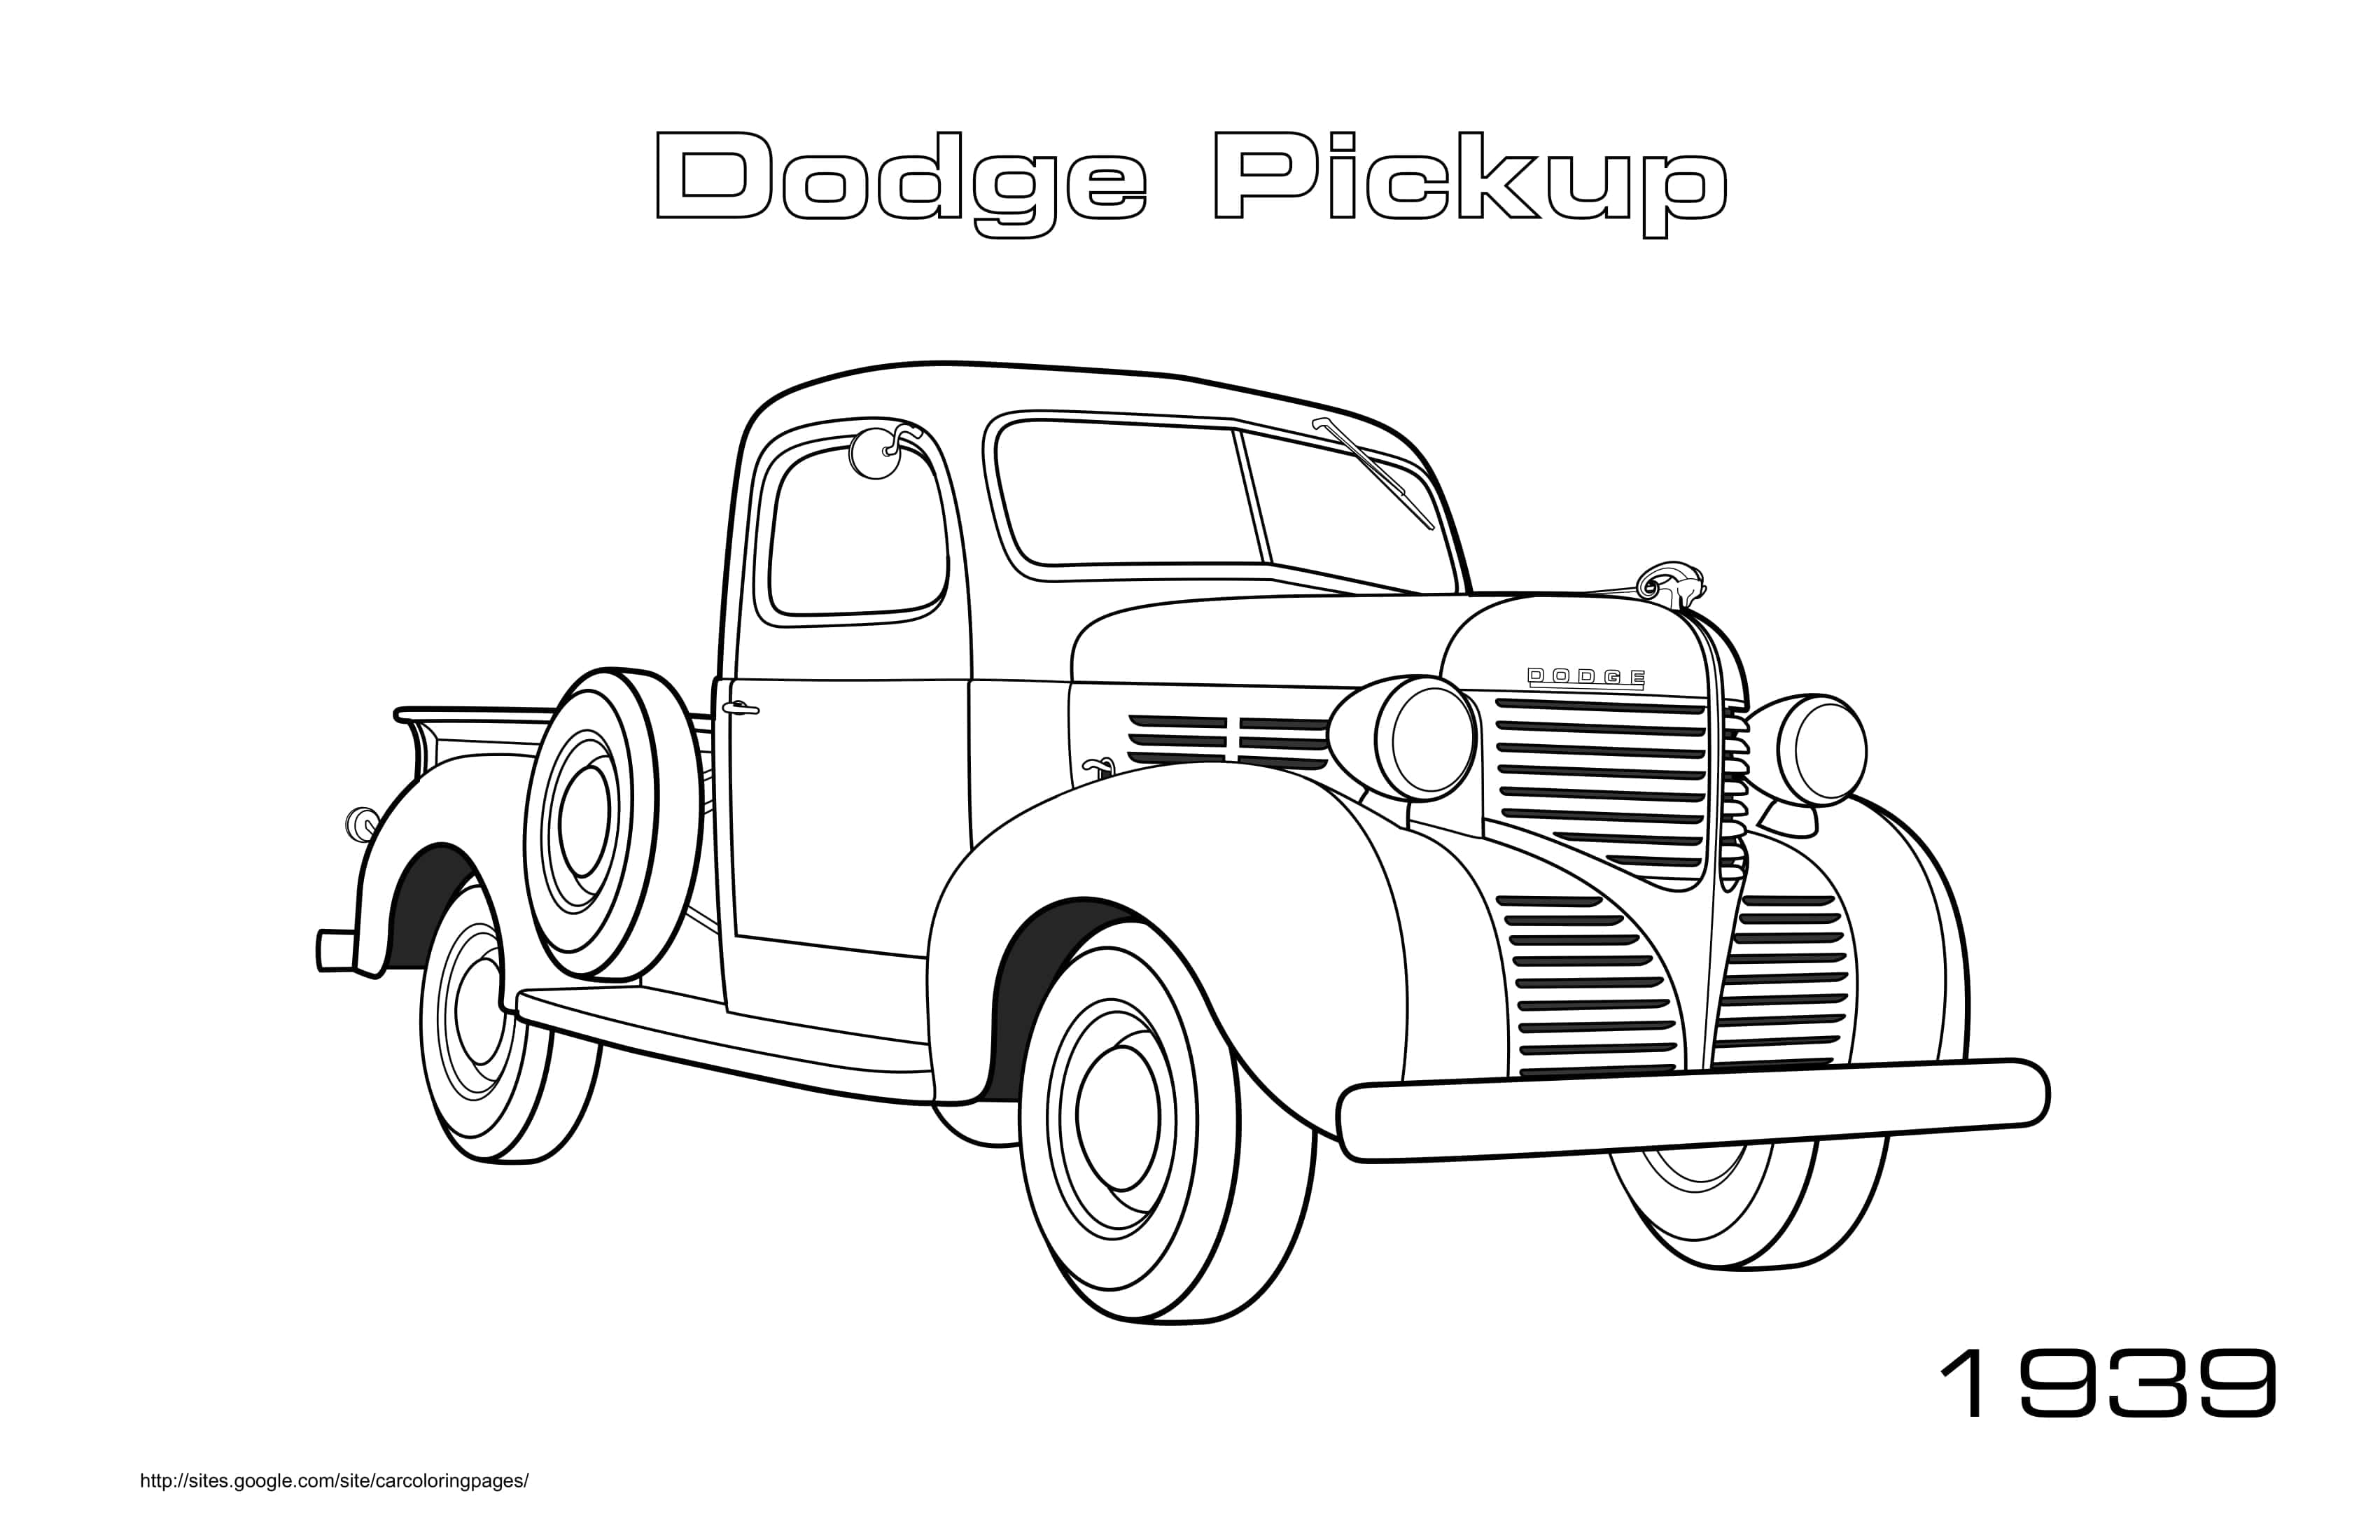 Old Car Dodge Pickup 1939 Coloring Page